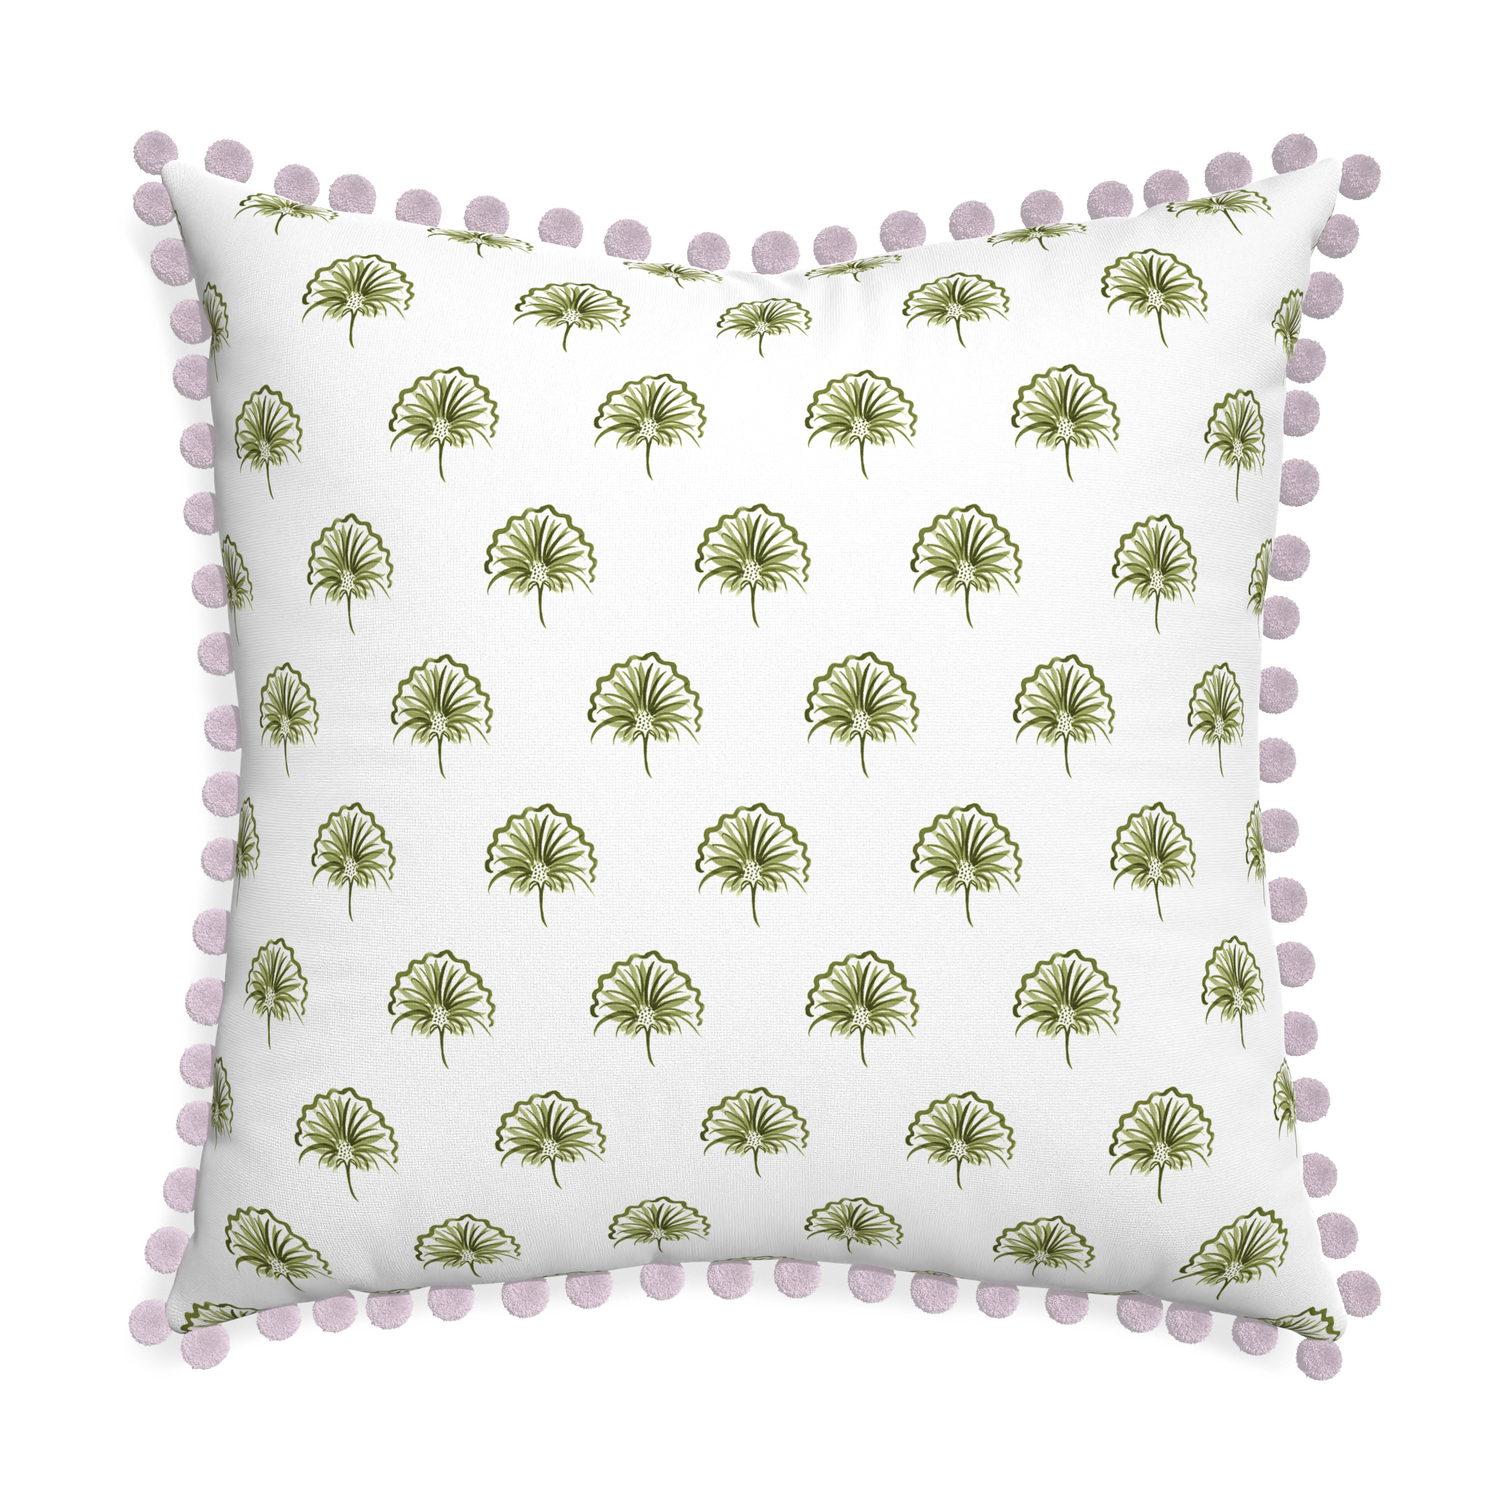 Euro-sham penelope moss custom pillow with l on white background